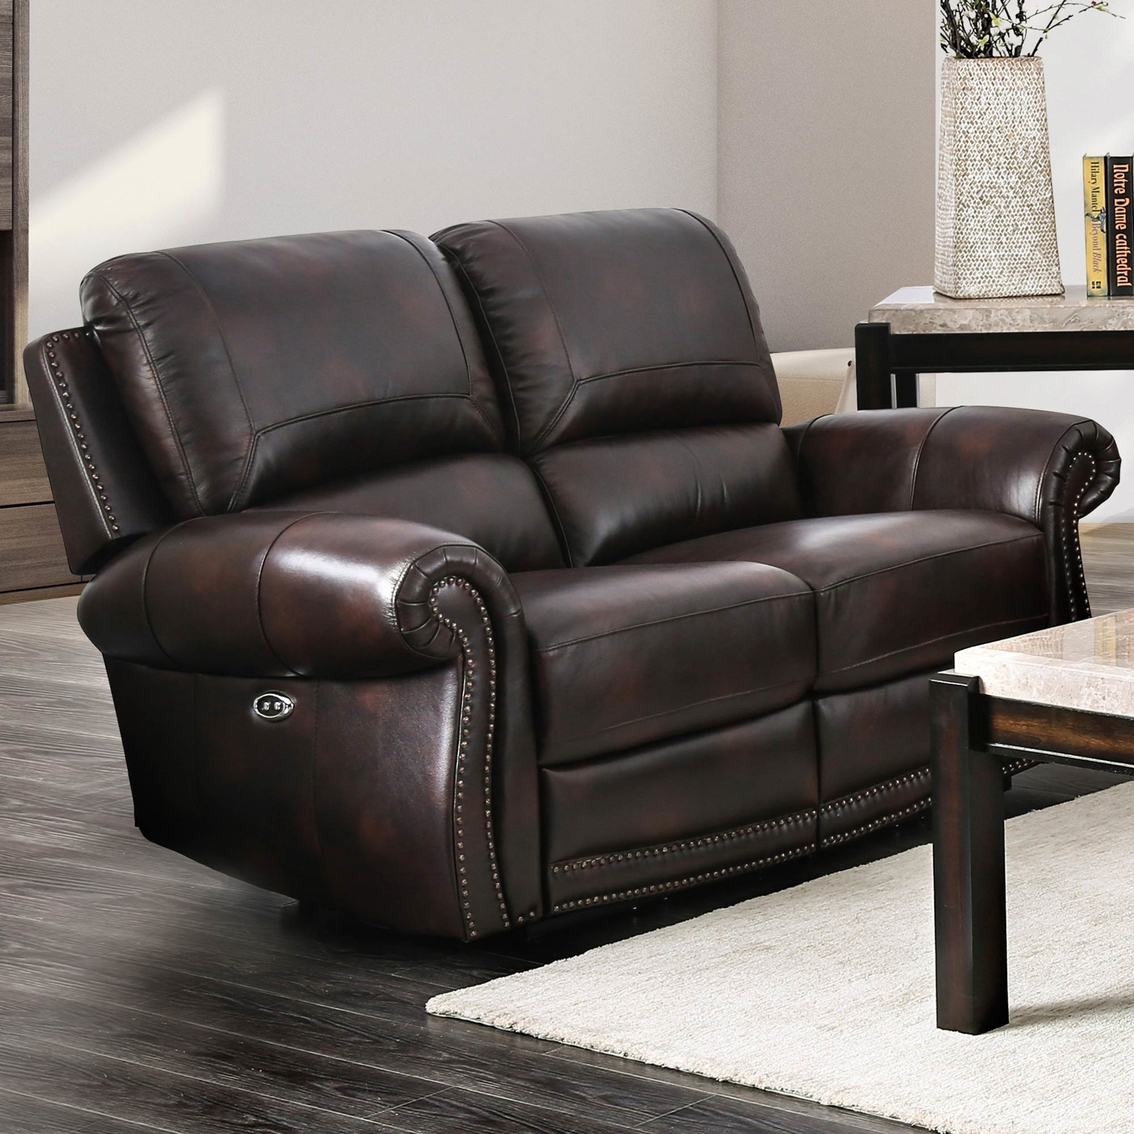 Furniture Of America Edmore Leather Power Assist Loveseat | Sofas ...